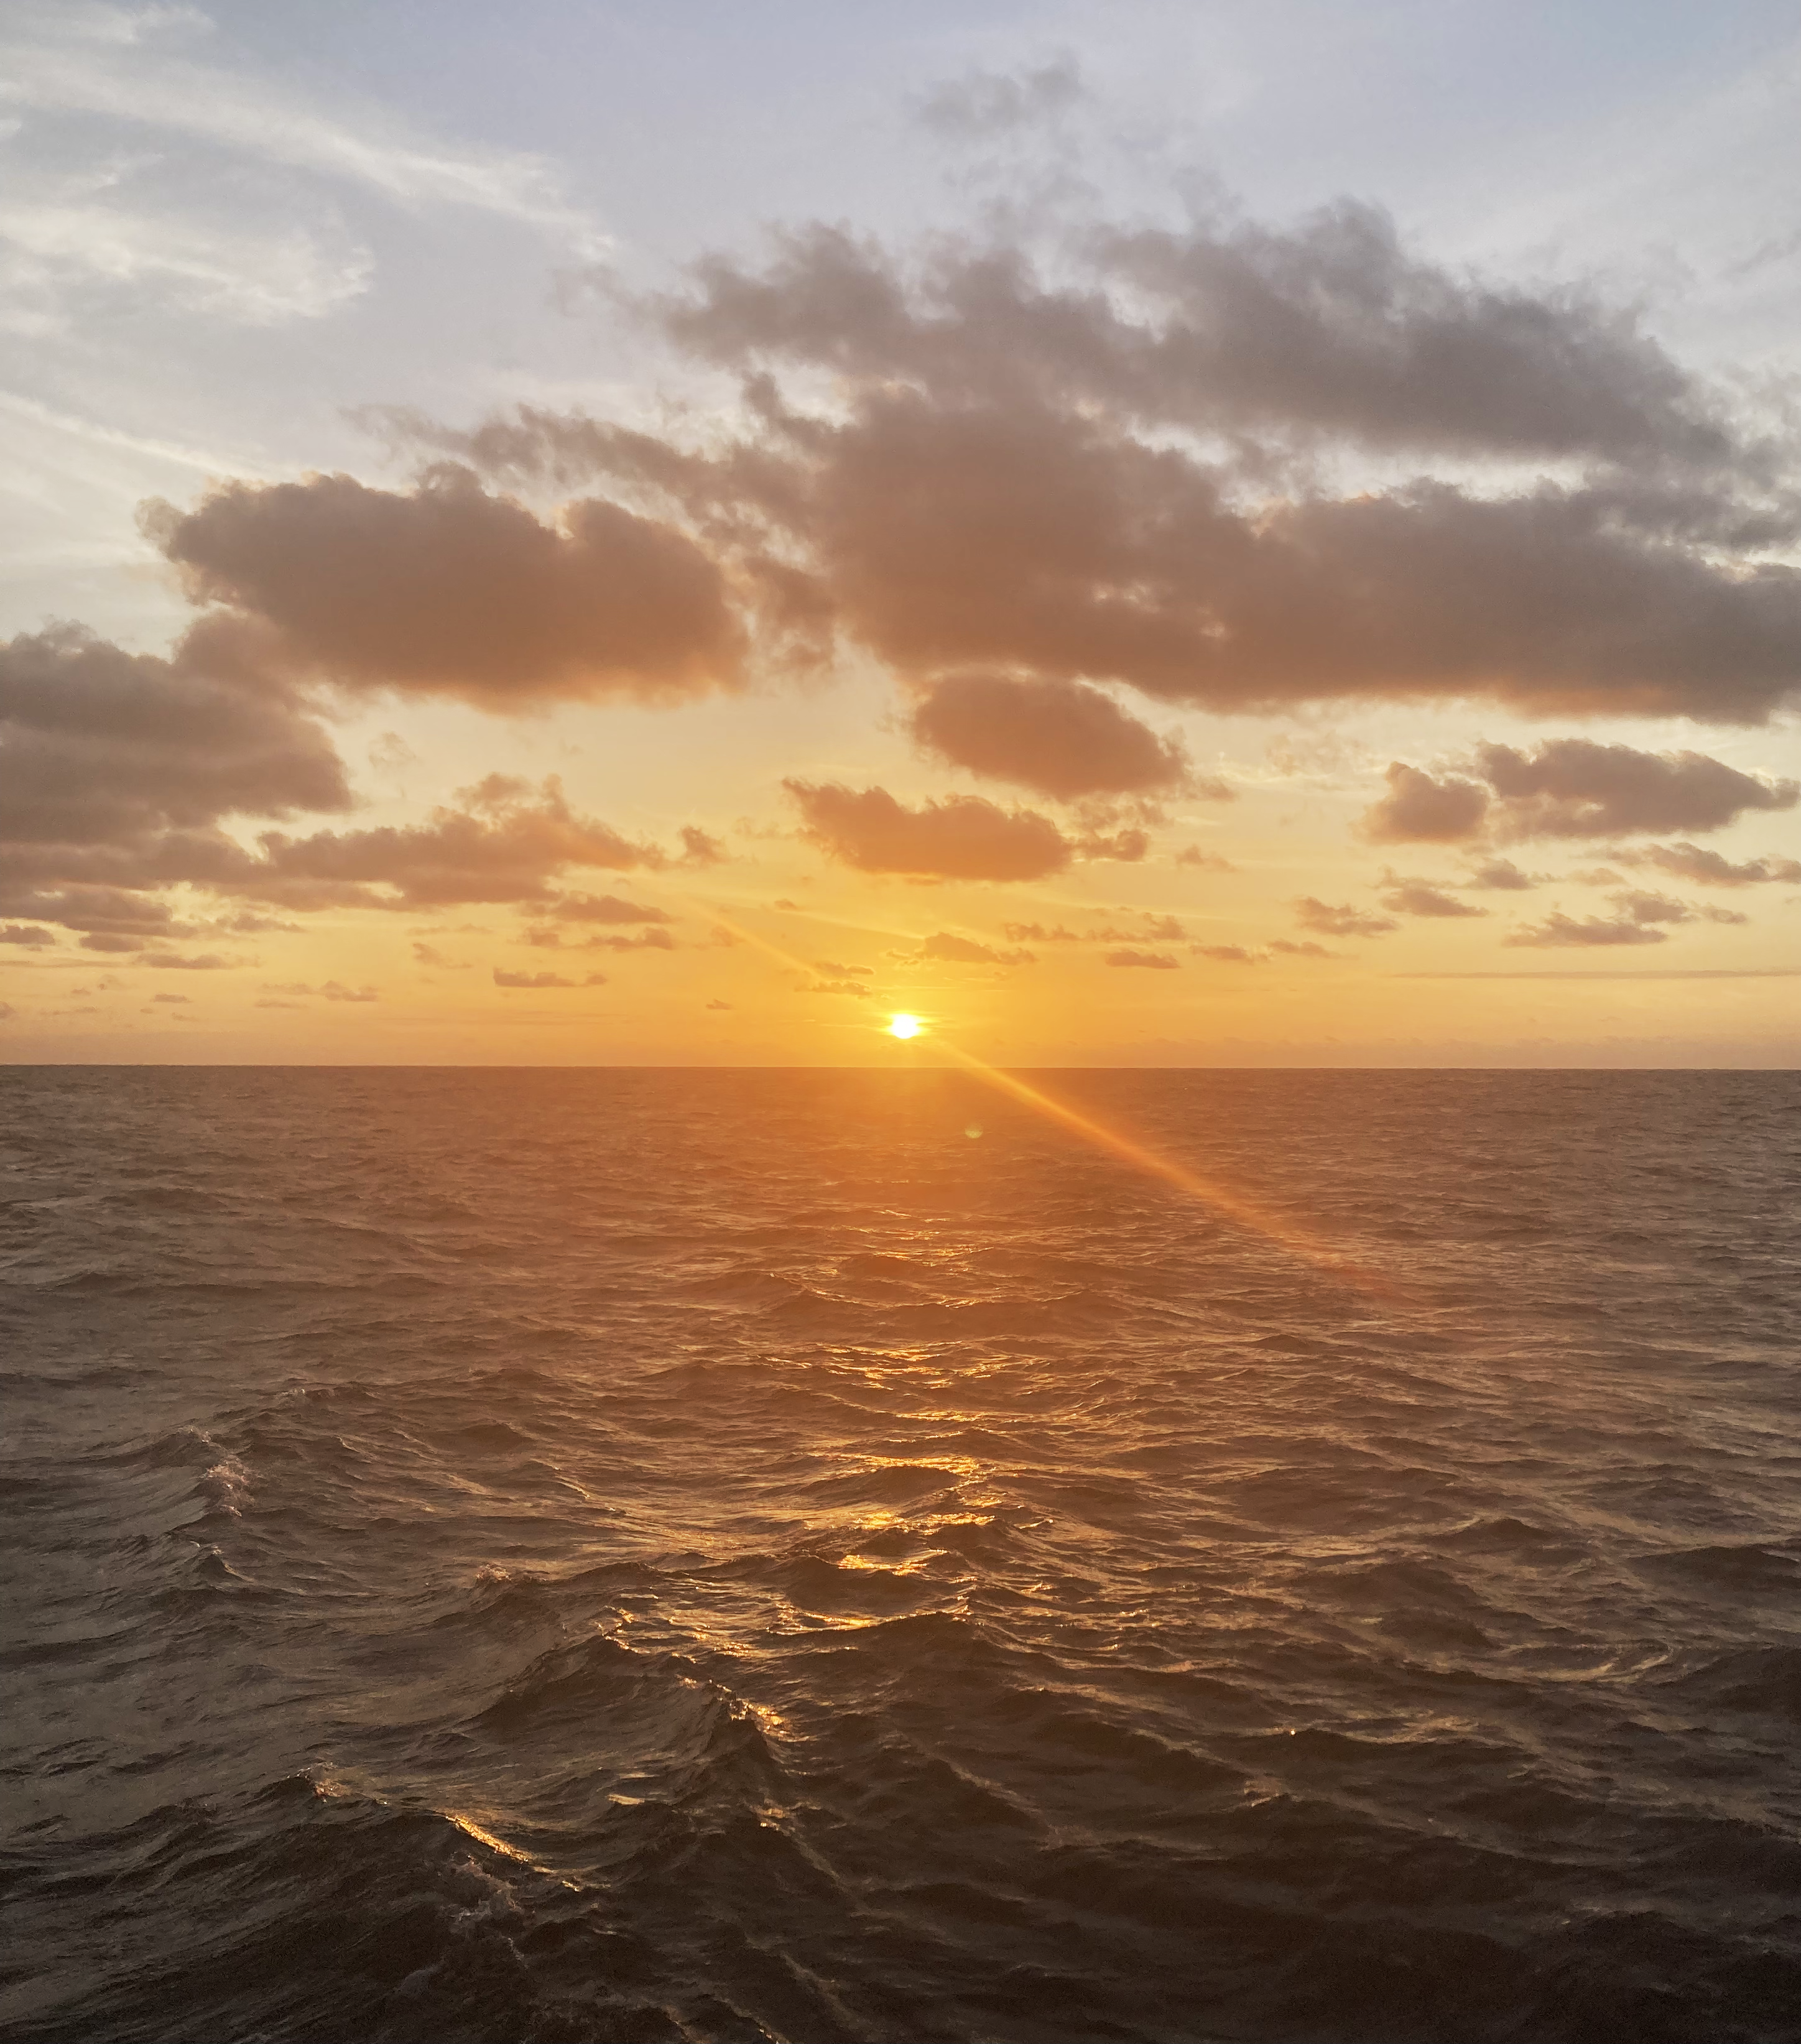 view of a sunrise over a dark sea, scattered grey clouds in the sky